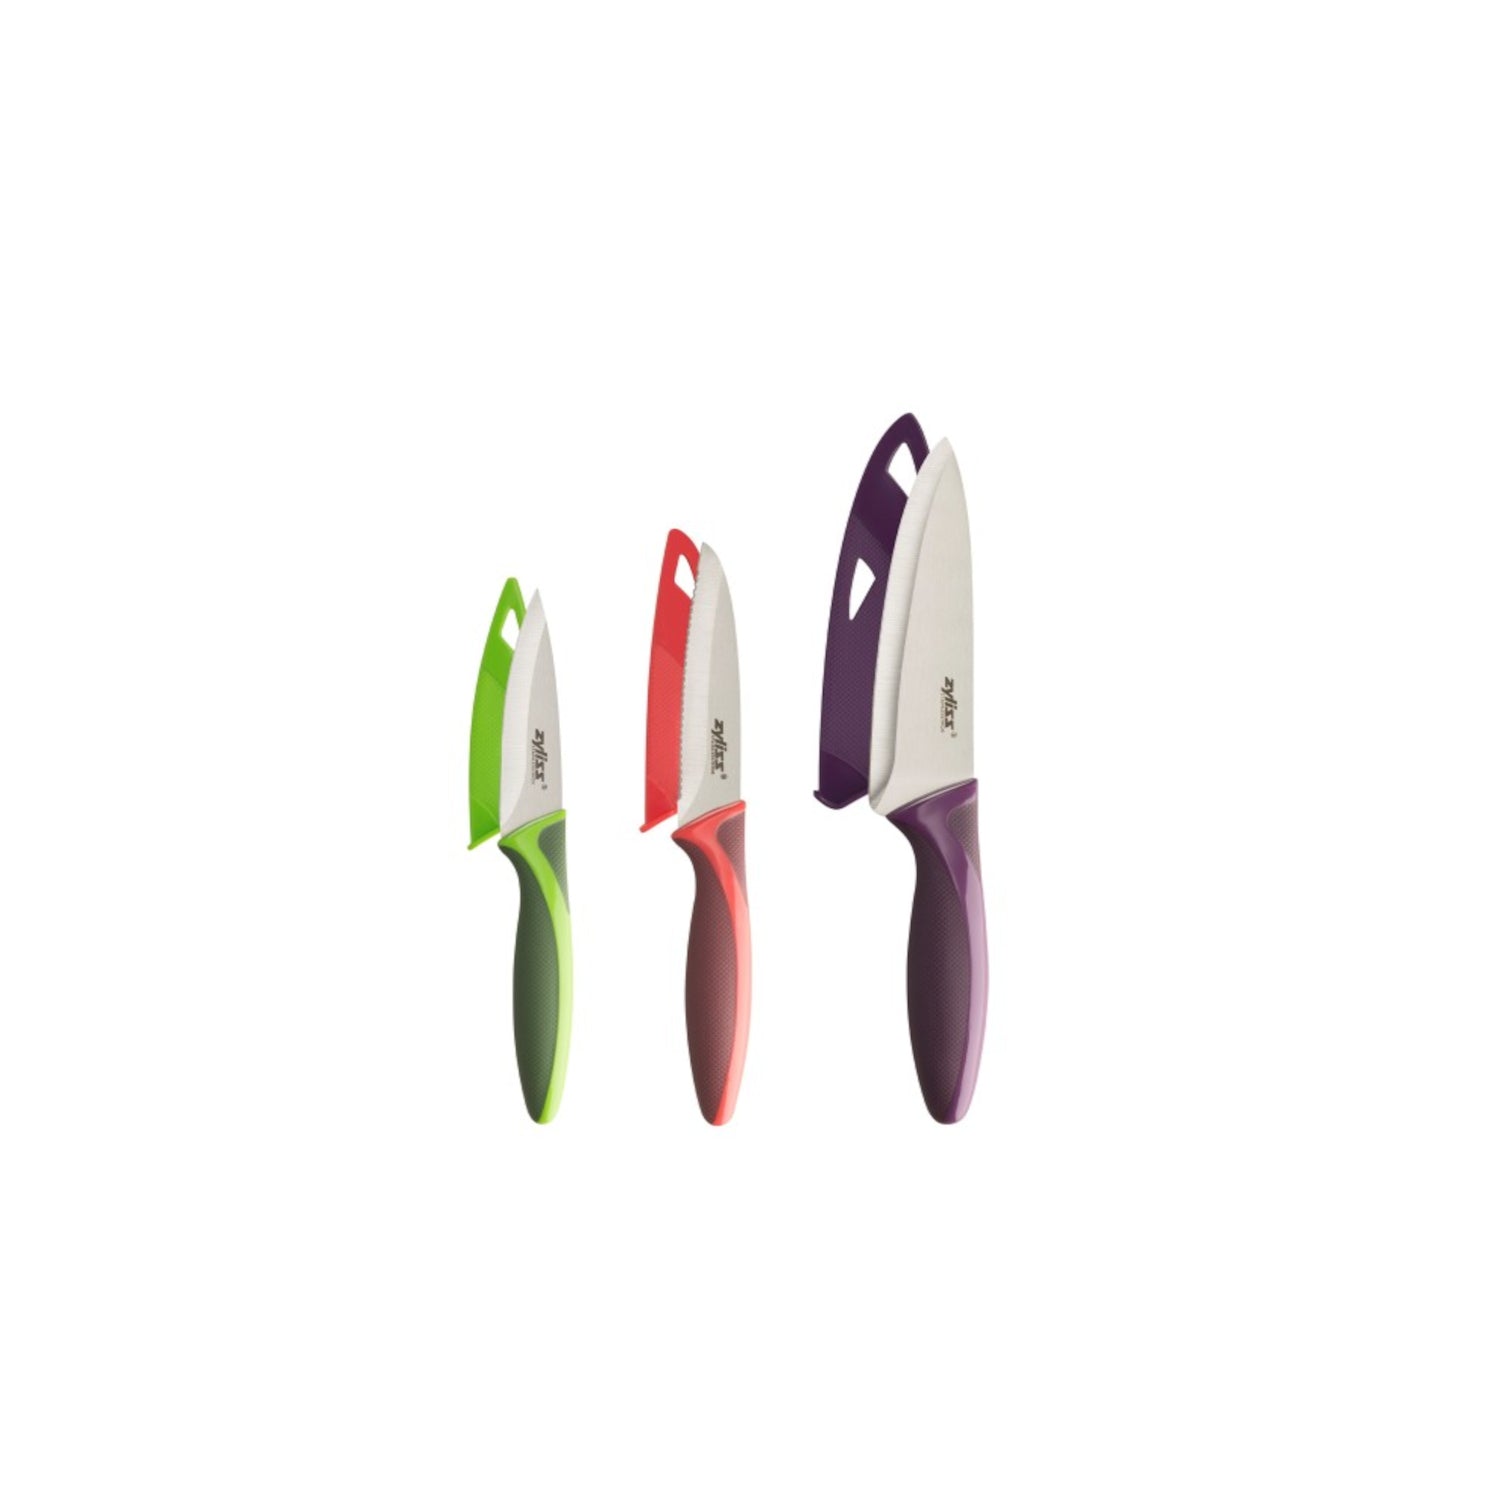 Zyliss 3-Piece Knife Set - Multi 1 Shaws Department Stores